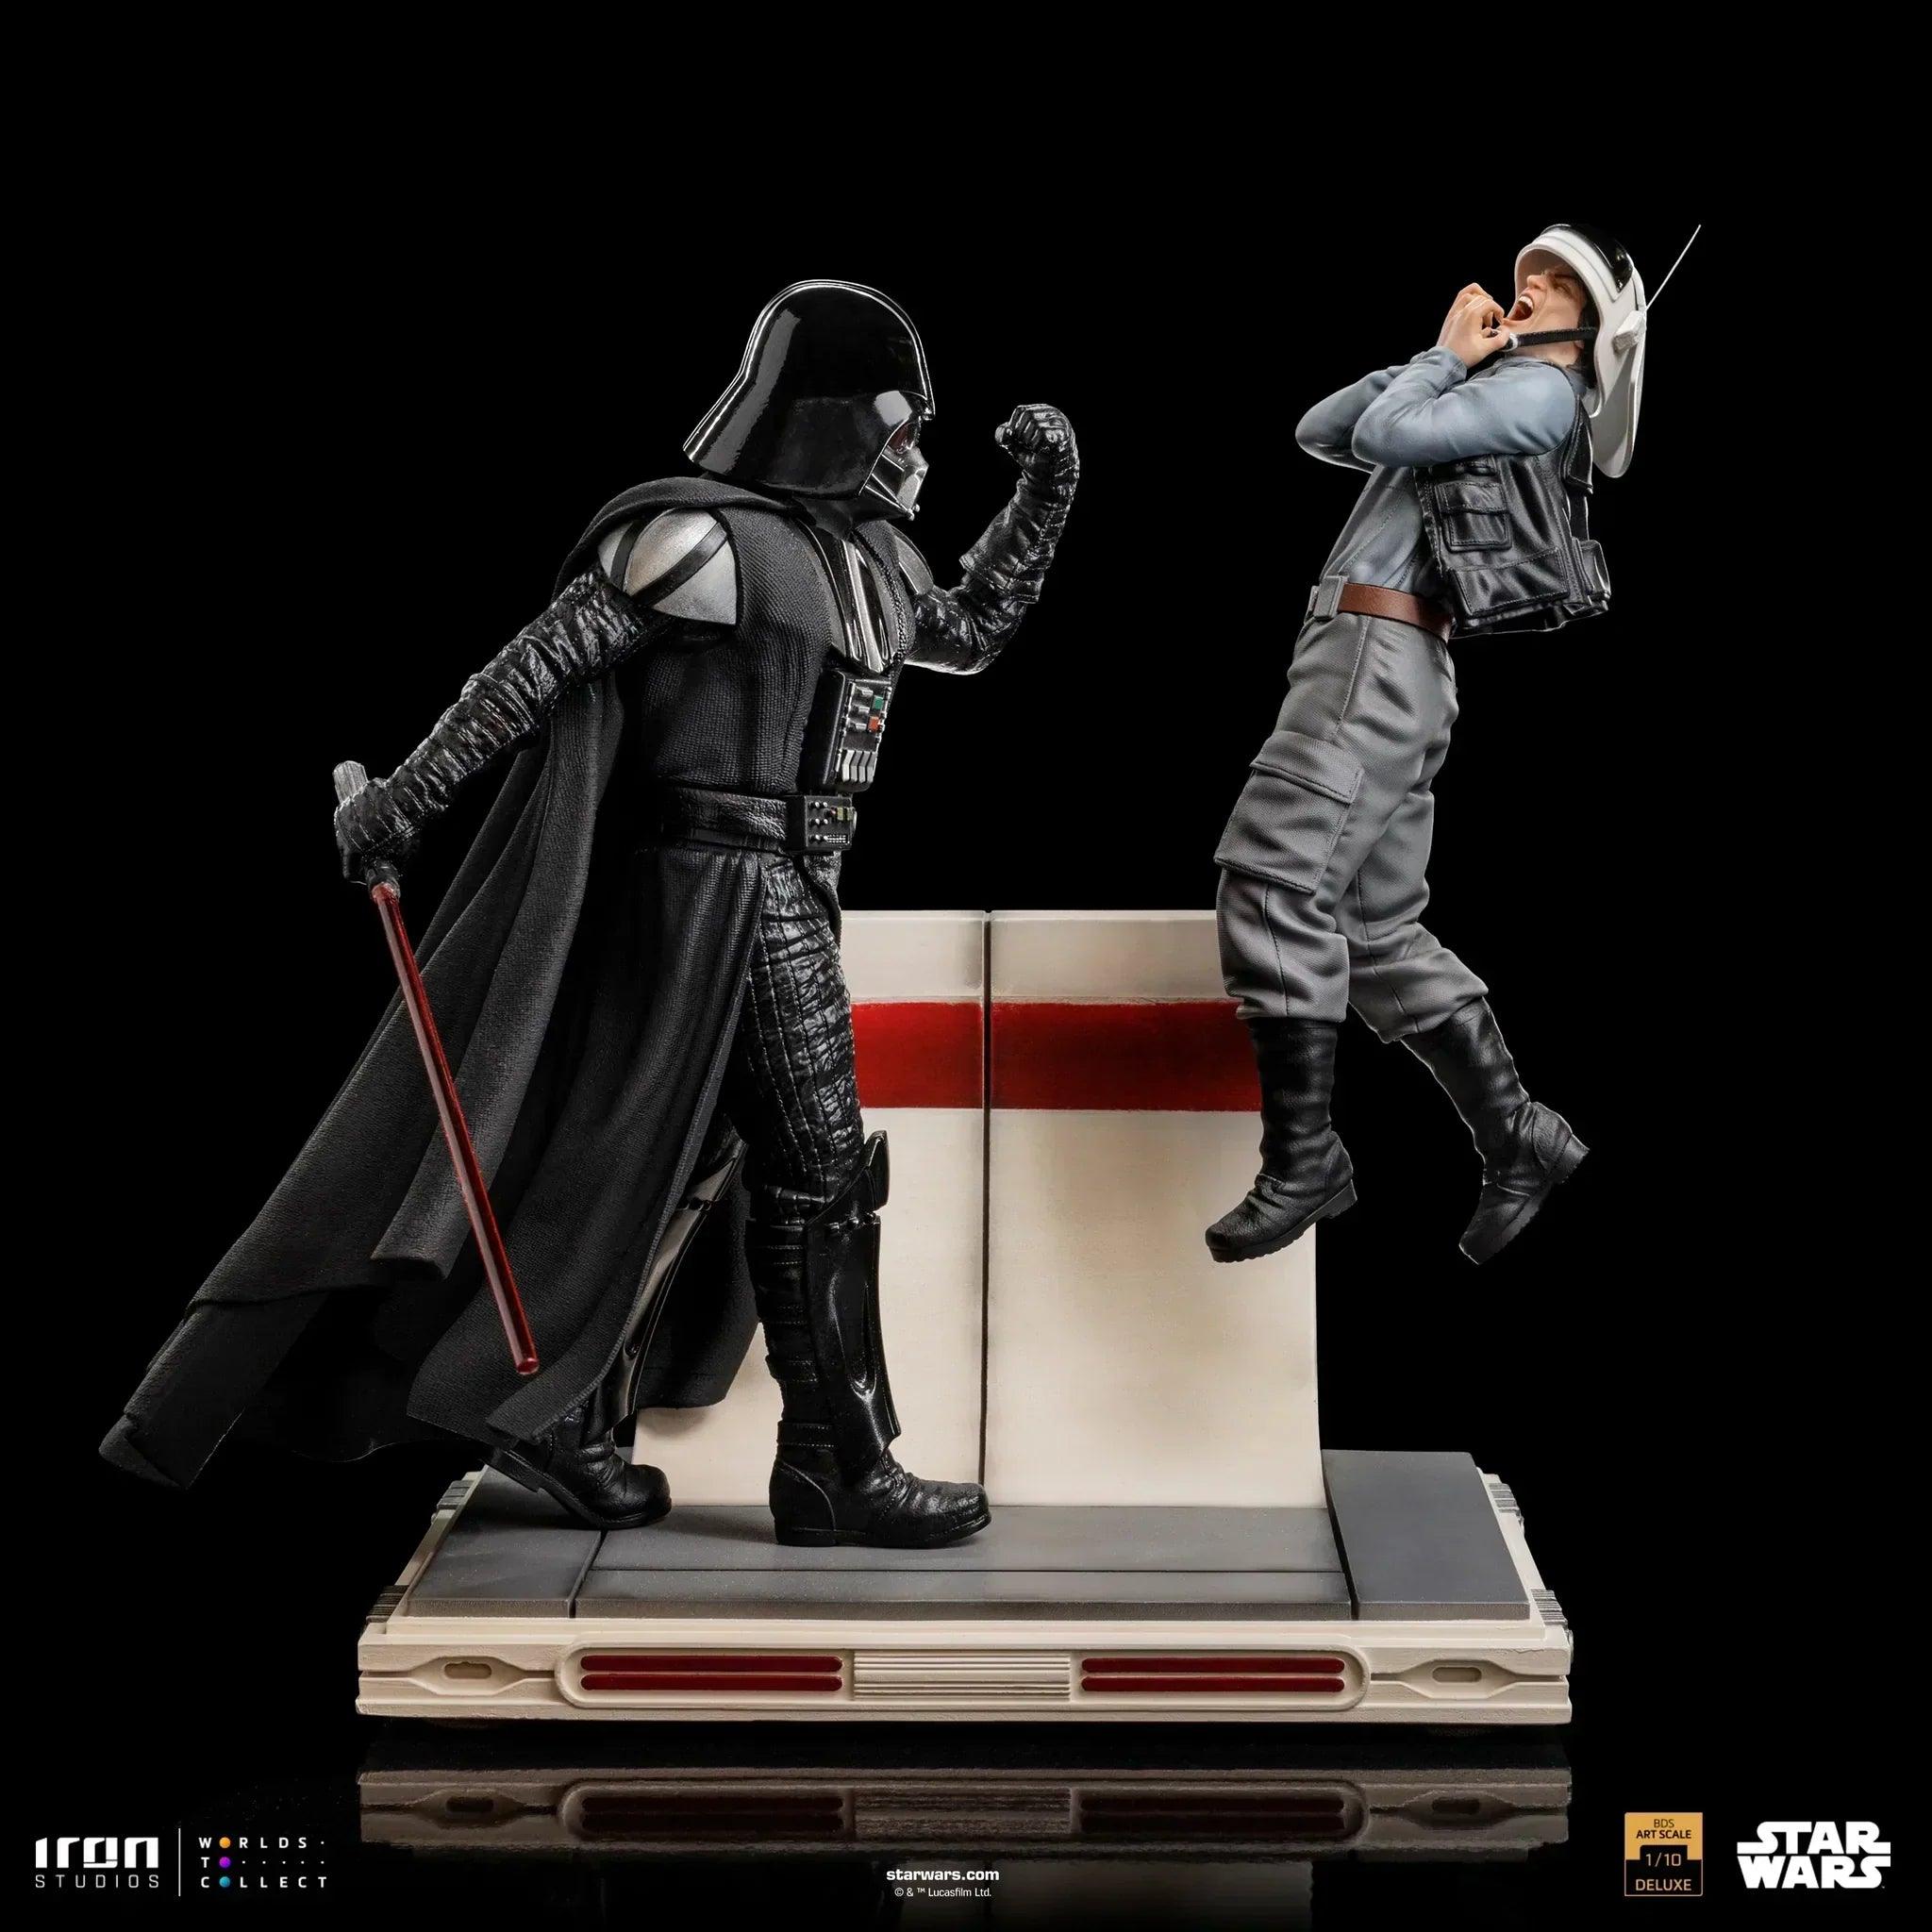 Iron Studios - Star Wars: Rogue One - Darth Vader Deluxe BDS Art Scale Statue 1/10 - The Card Vault